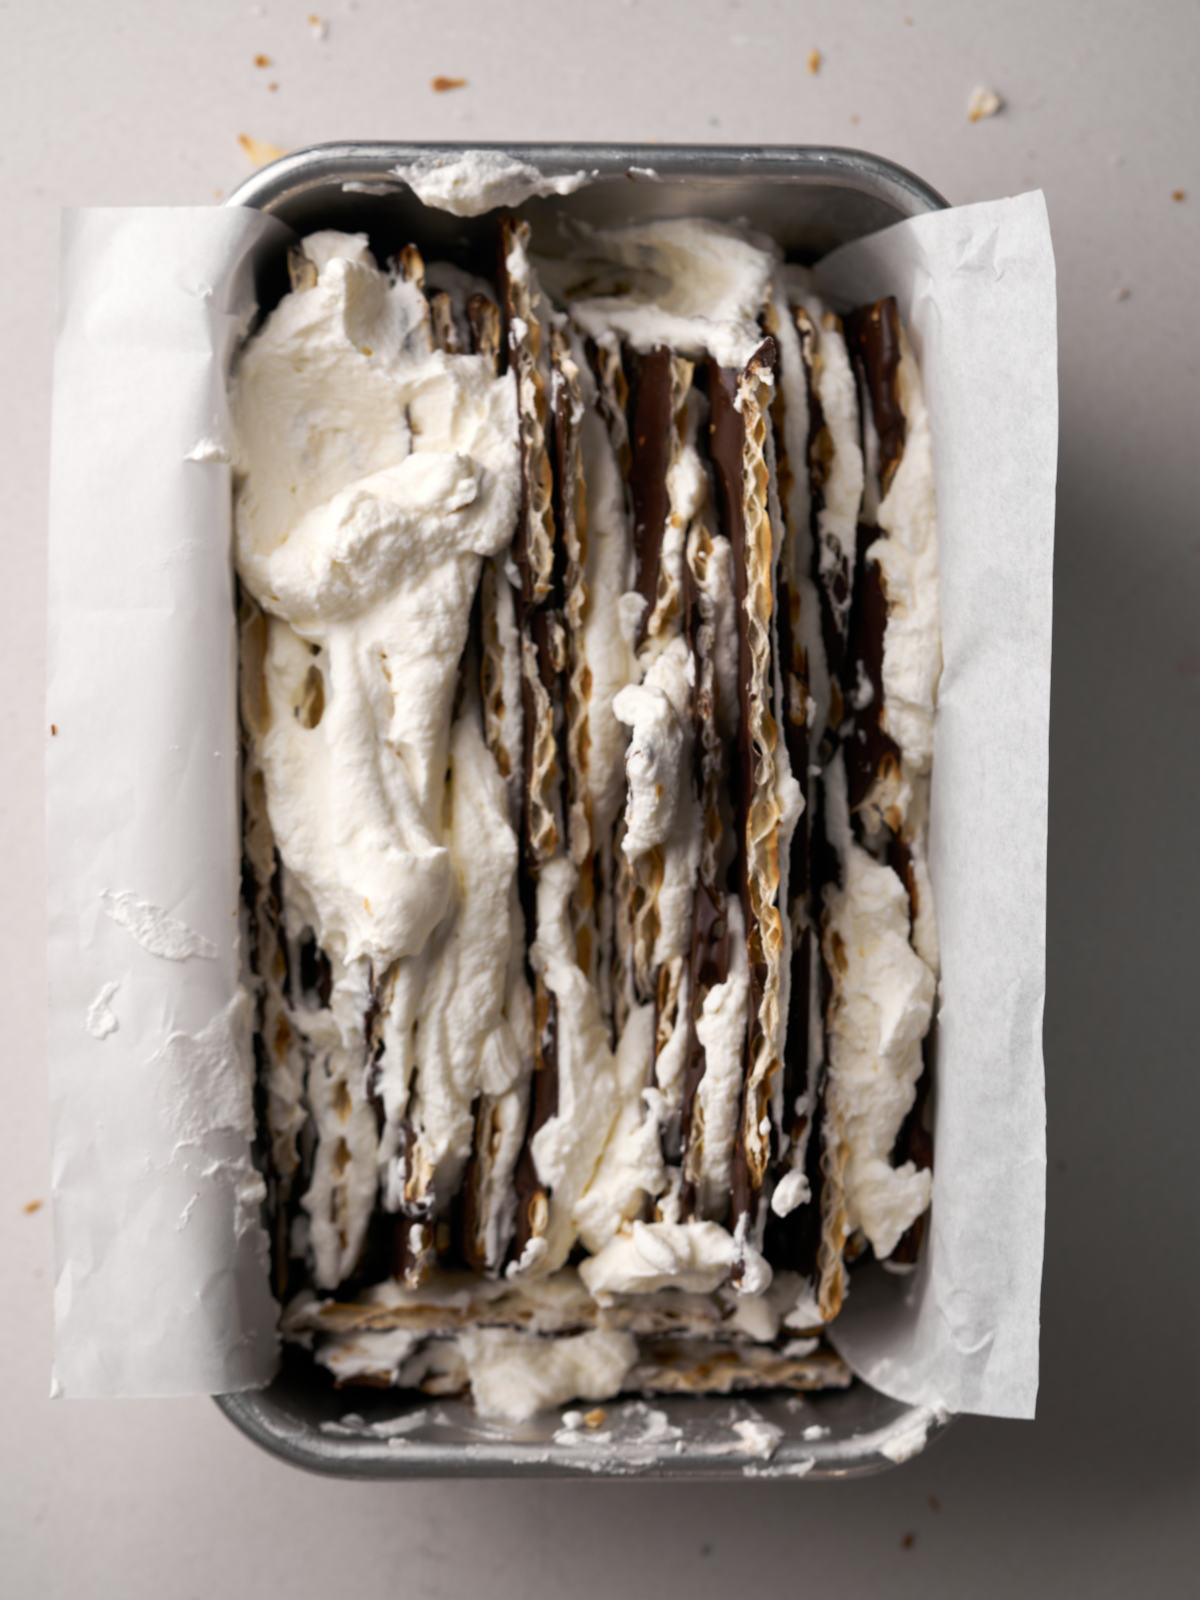 Vertical layers of matzo, chocolate and whipped cream in a silver loaf tin lined with parchment.